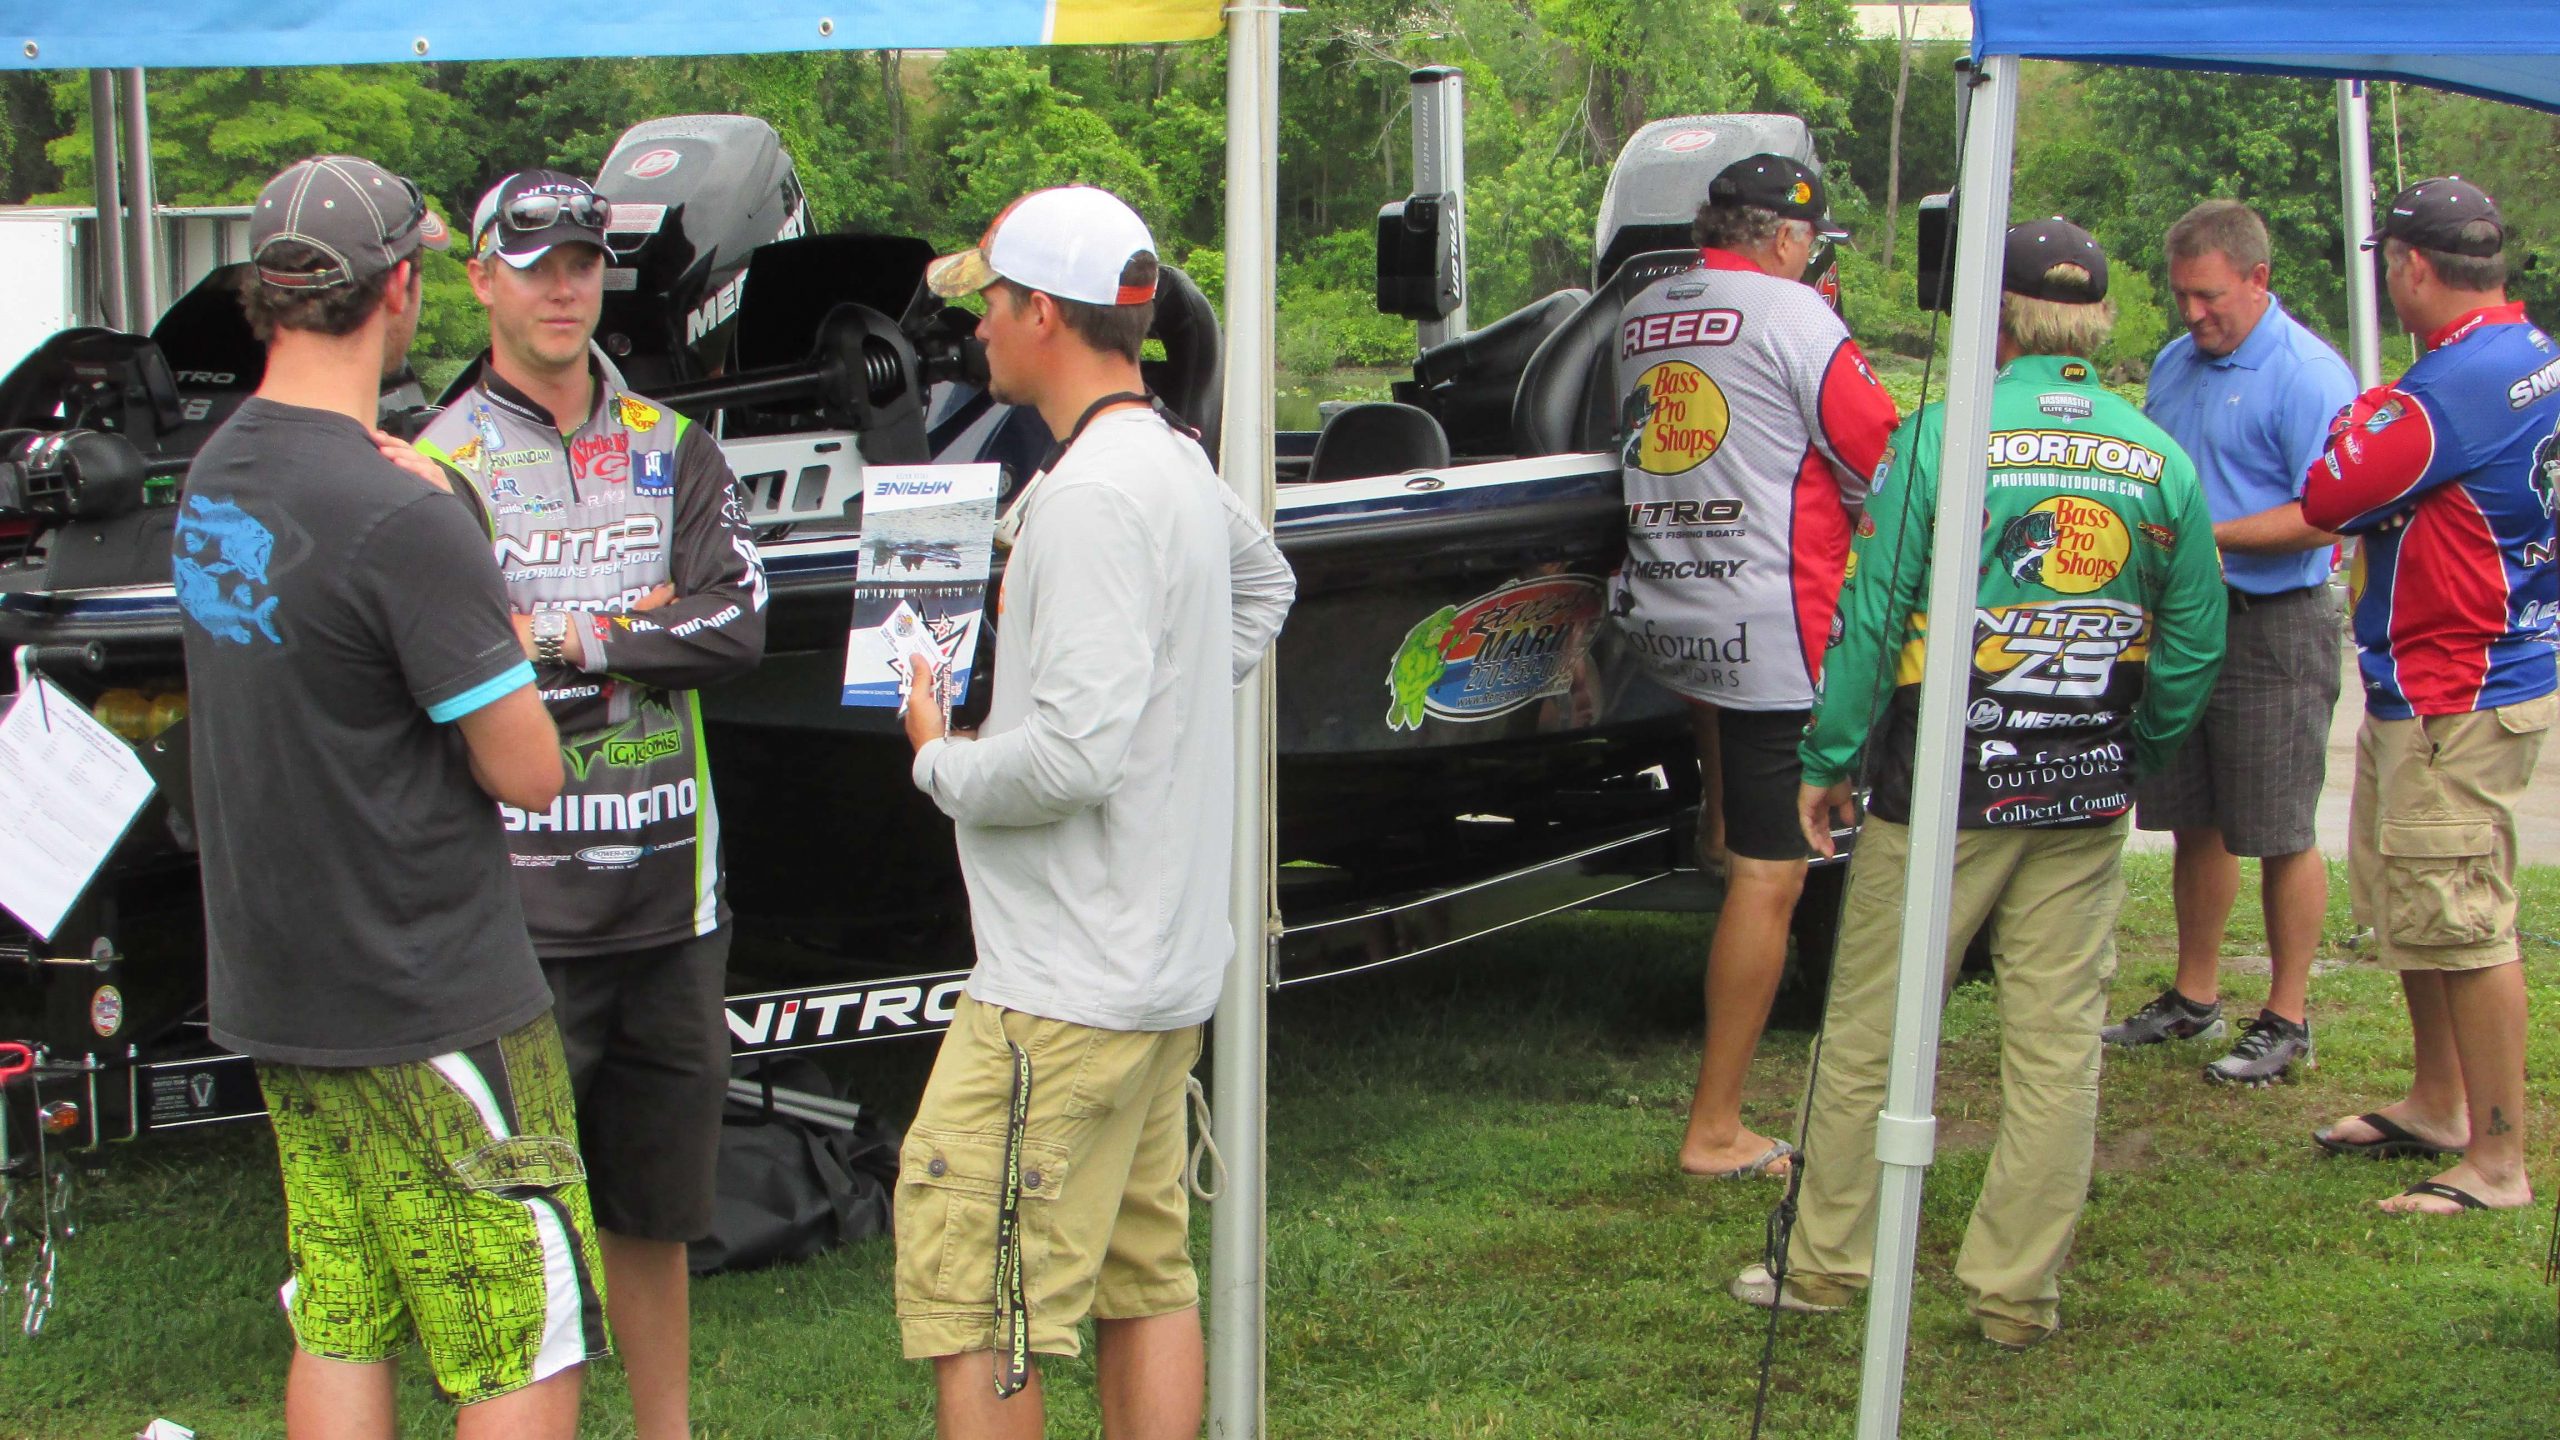 Many fishing fans stopped to ask a question...